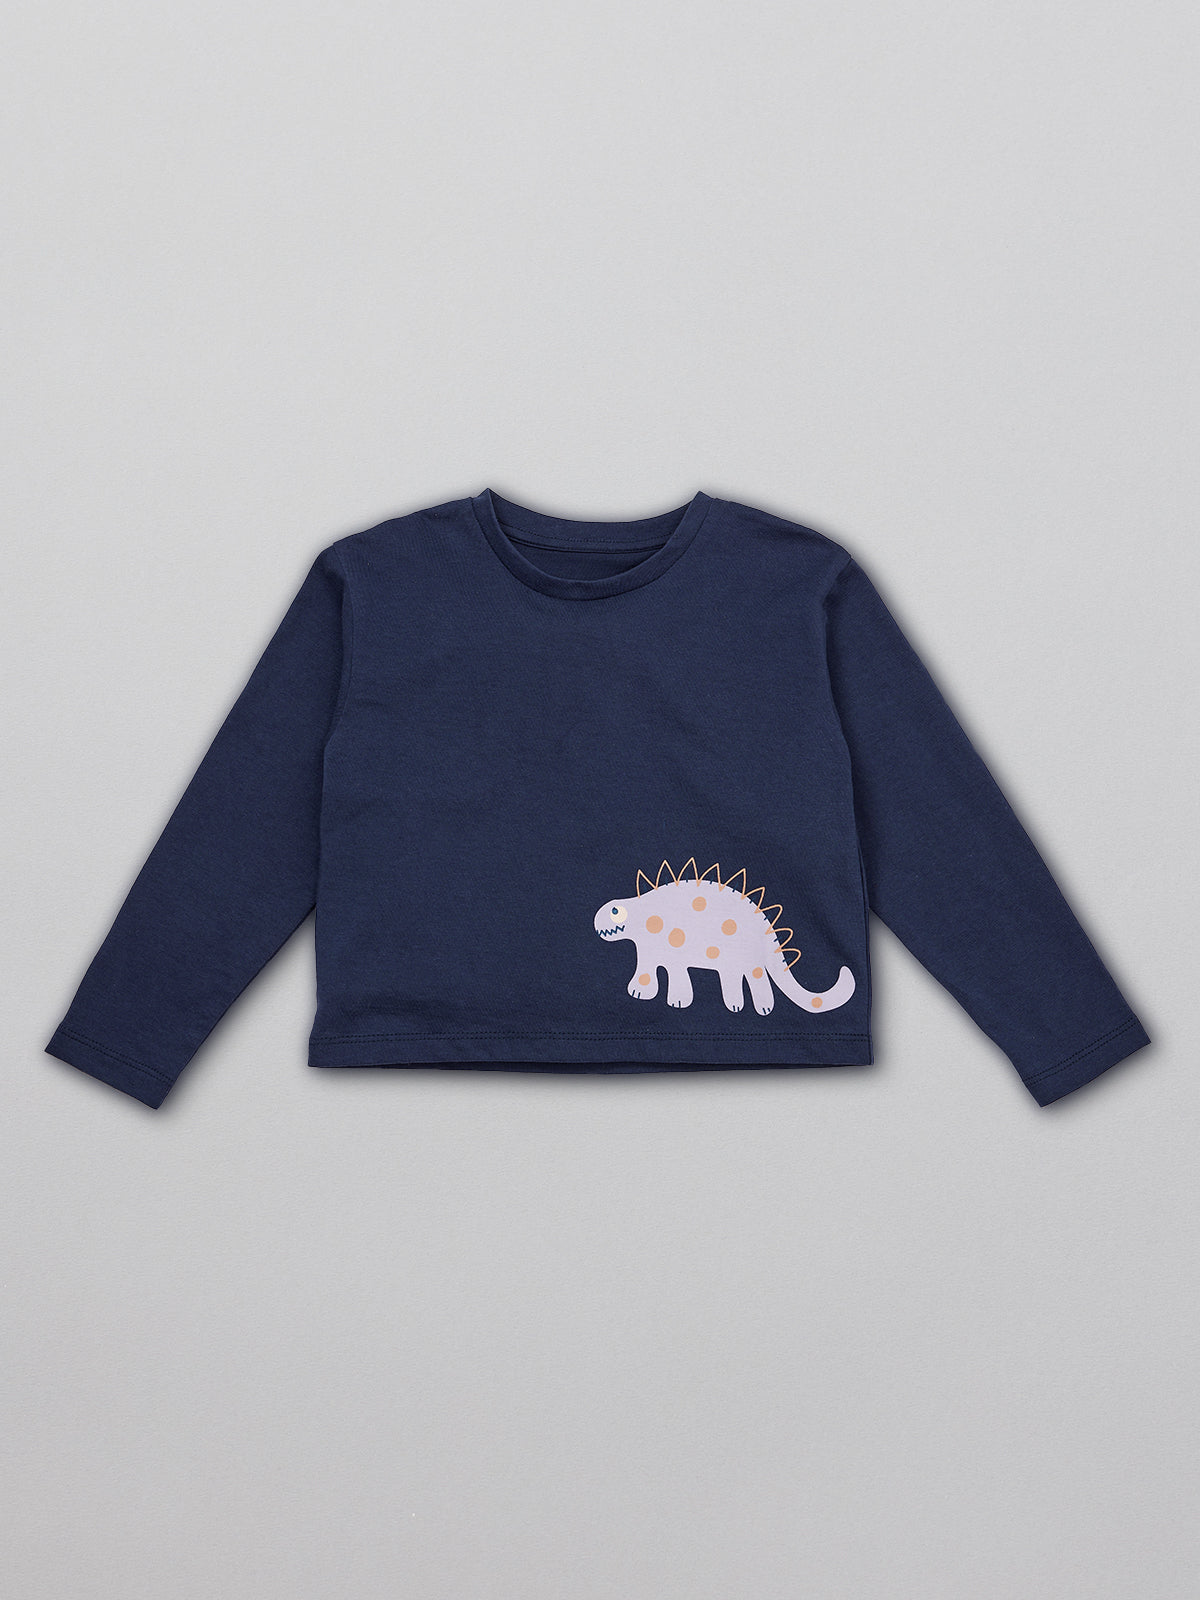 A sustainable long sleeved kids t-shirt in navy blue with a dinosaur print on the bottom right hand side, pictured from the front.  